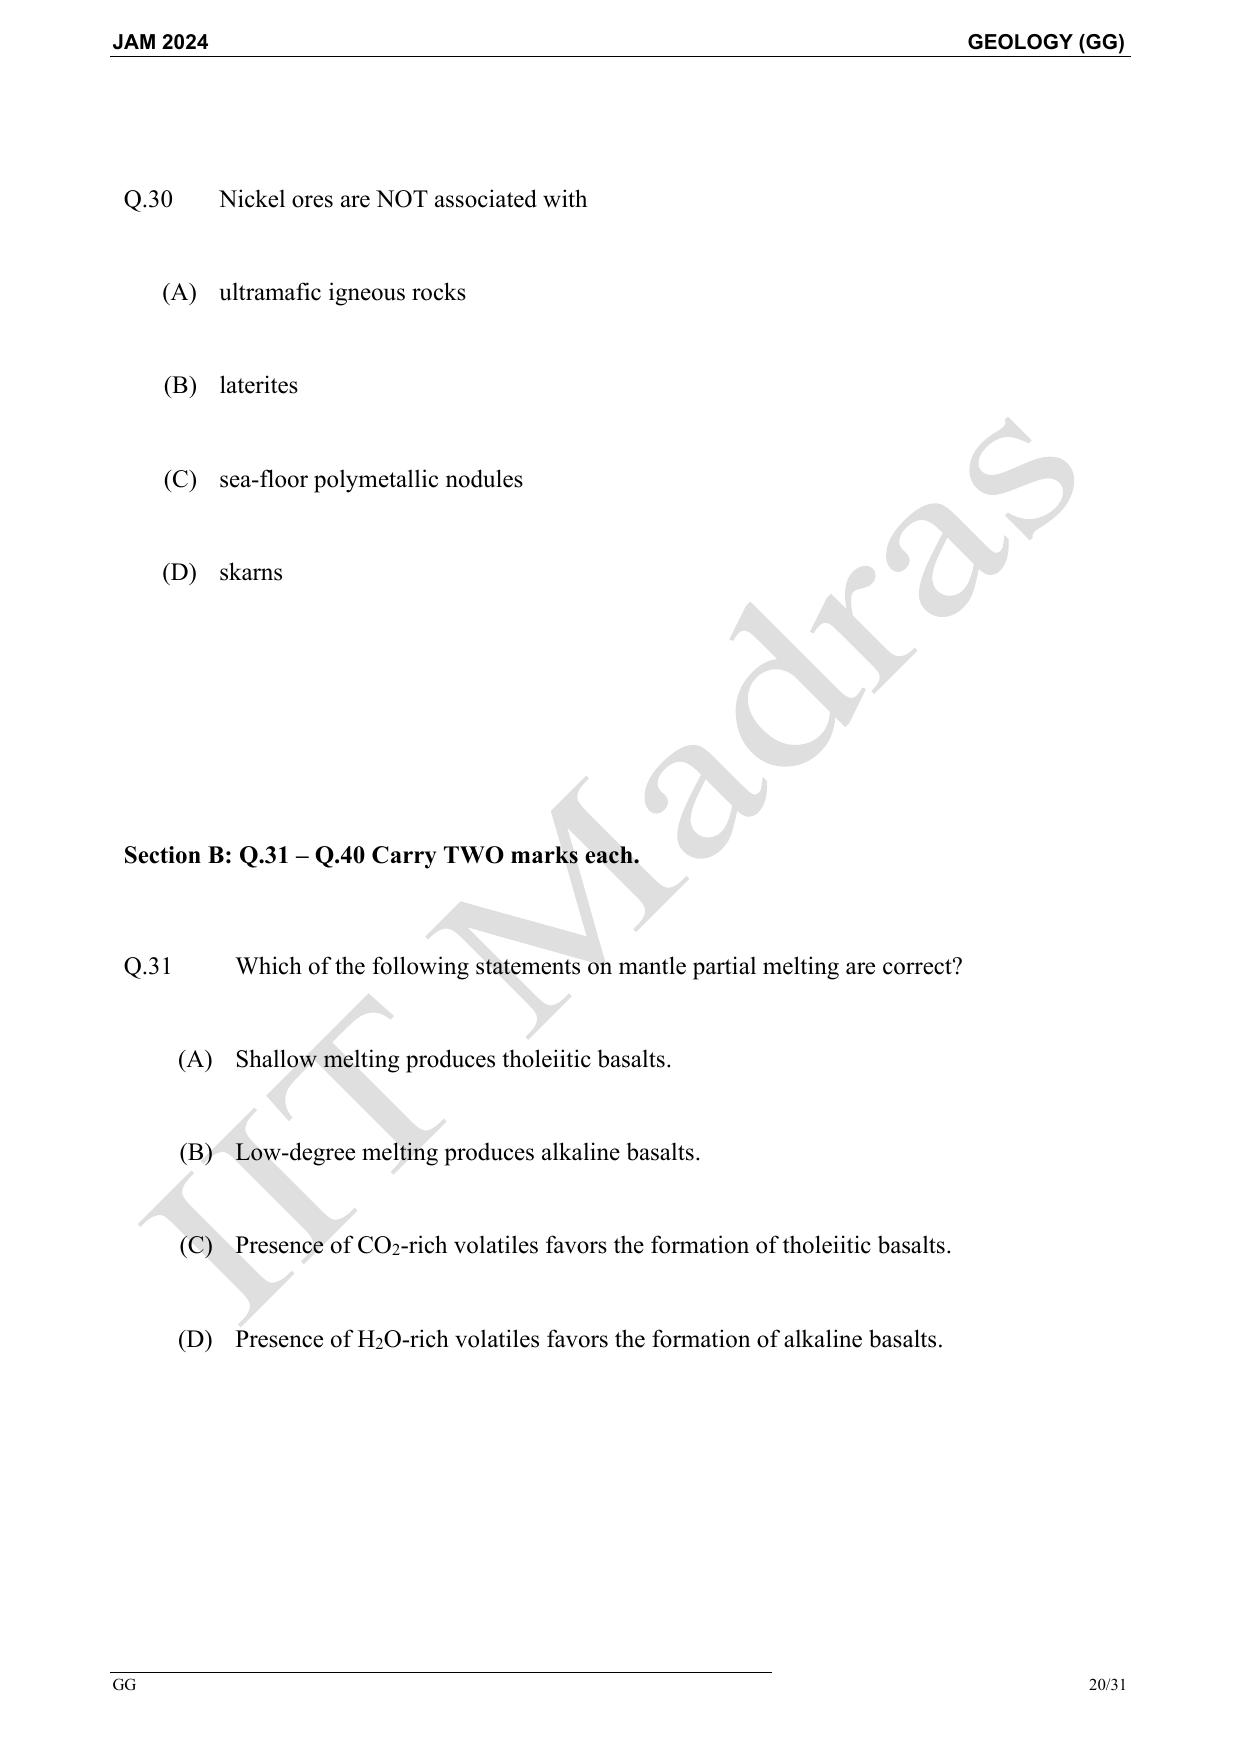 IIT JAM 2024 Geology (GG) Master Question Paper - Page 20